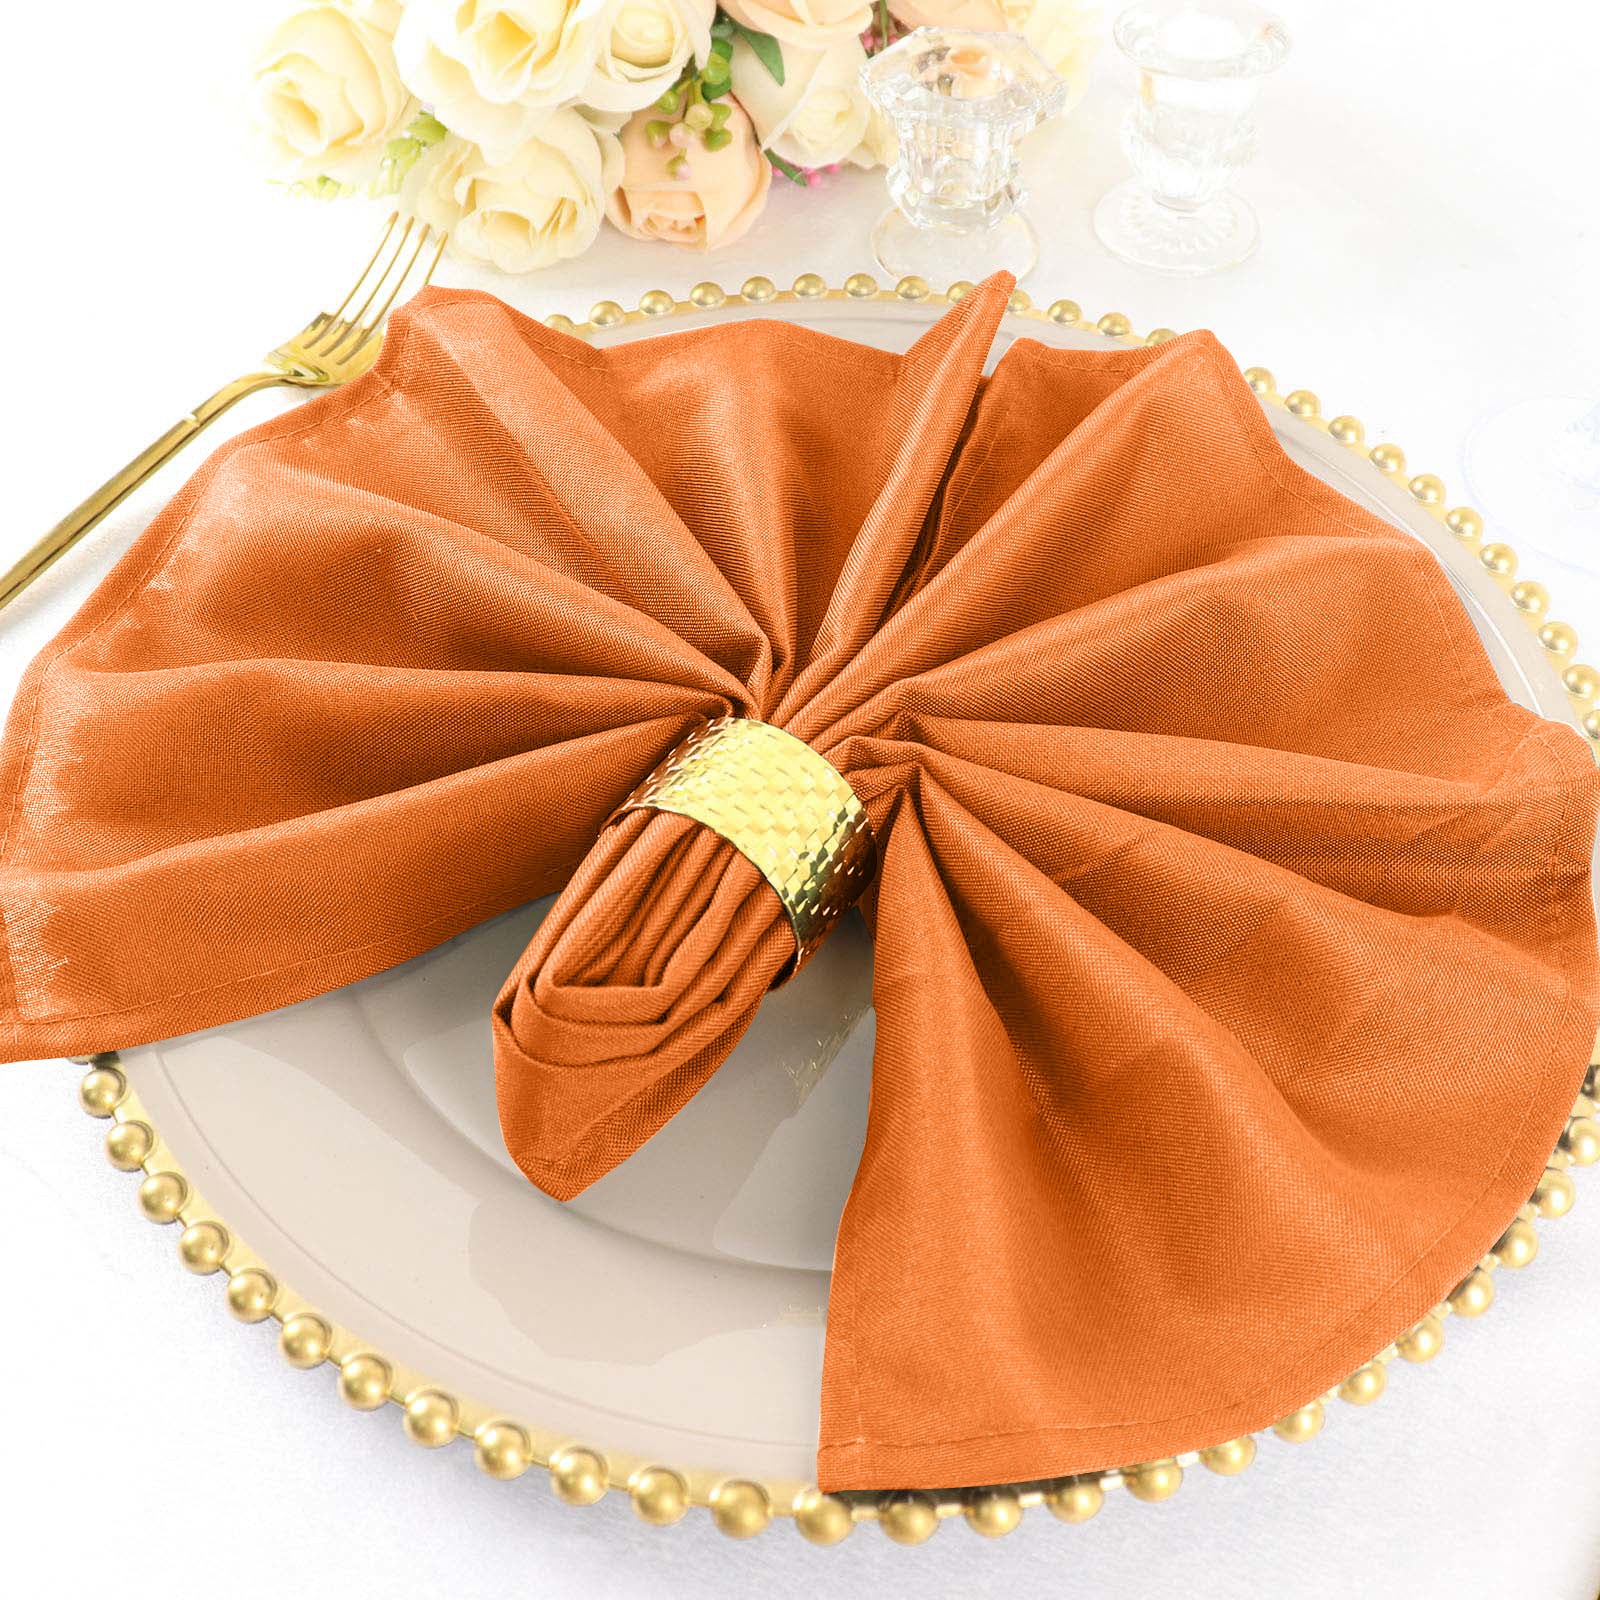 Orange Dinner Cloth Napkins Set of 12, Cotton 18x18 in Reusable and  Washable